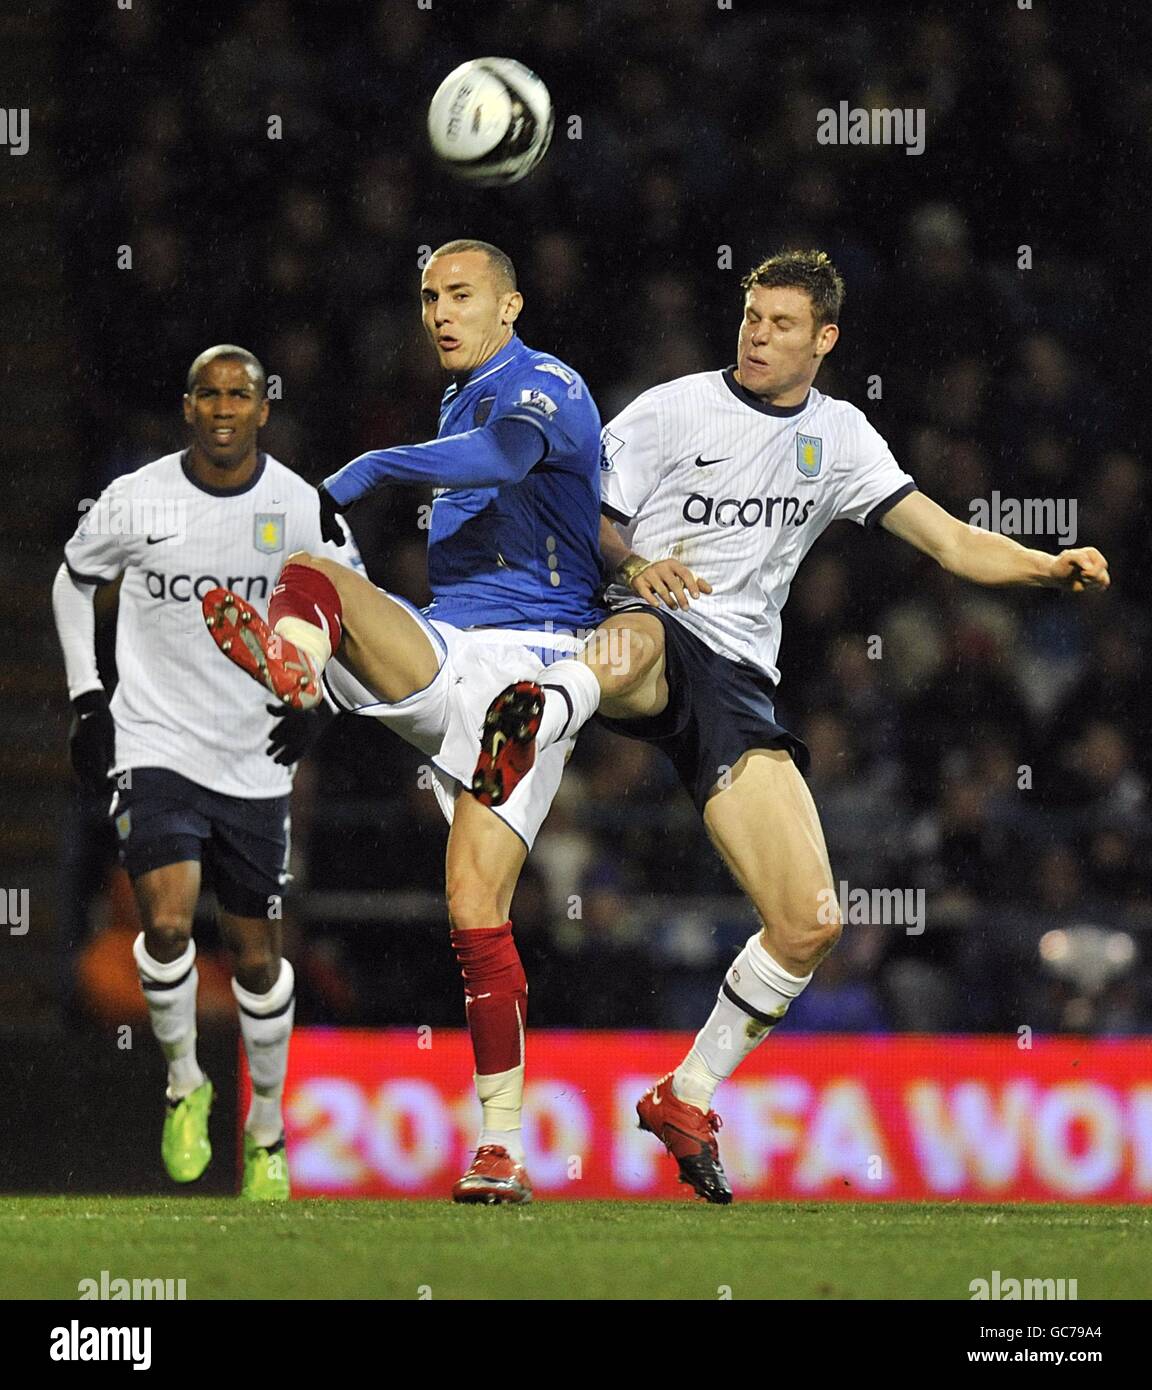 Portsmouth's Hassan Yebda (centre) and Aston Villa's James Milner (right) battle for the ball. Stock Photo